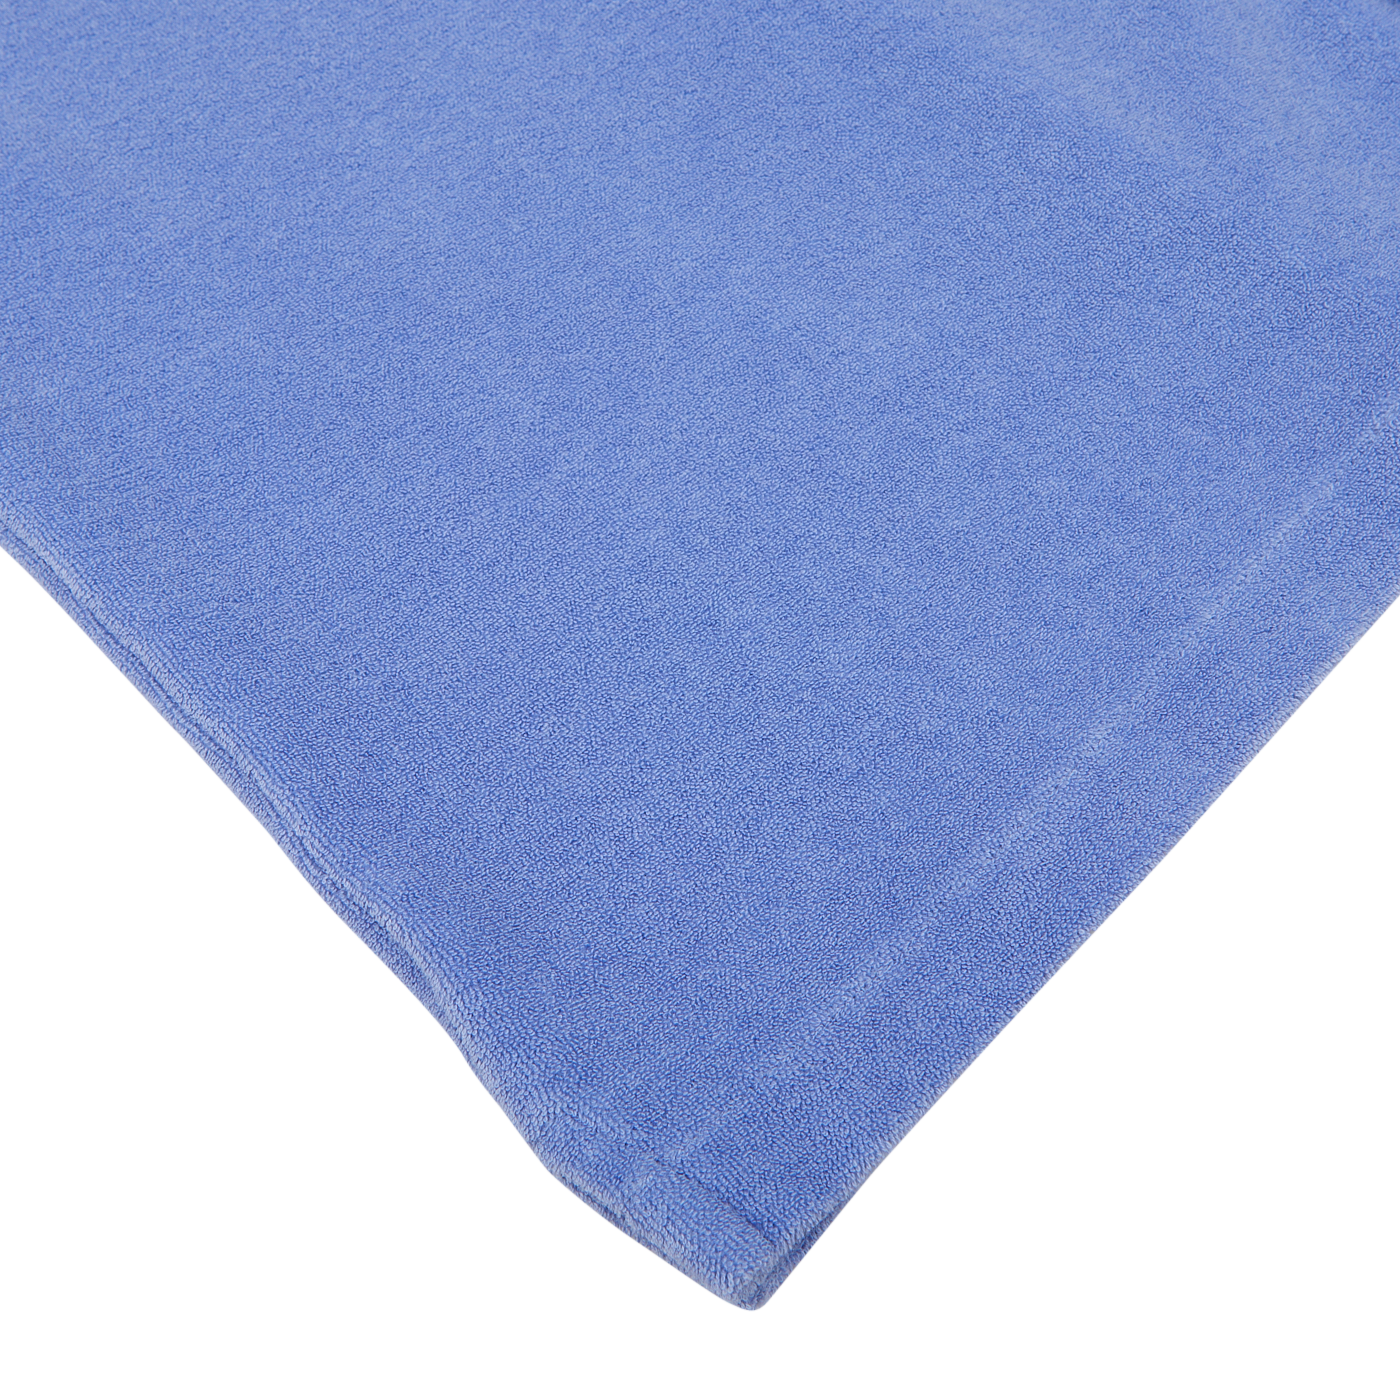 A light blue Altea microfiber cleaning cloth on a white surface.